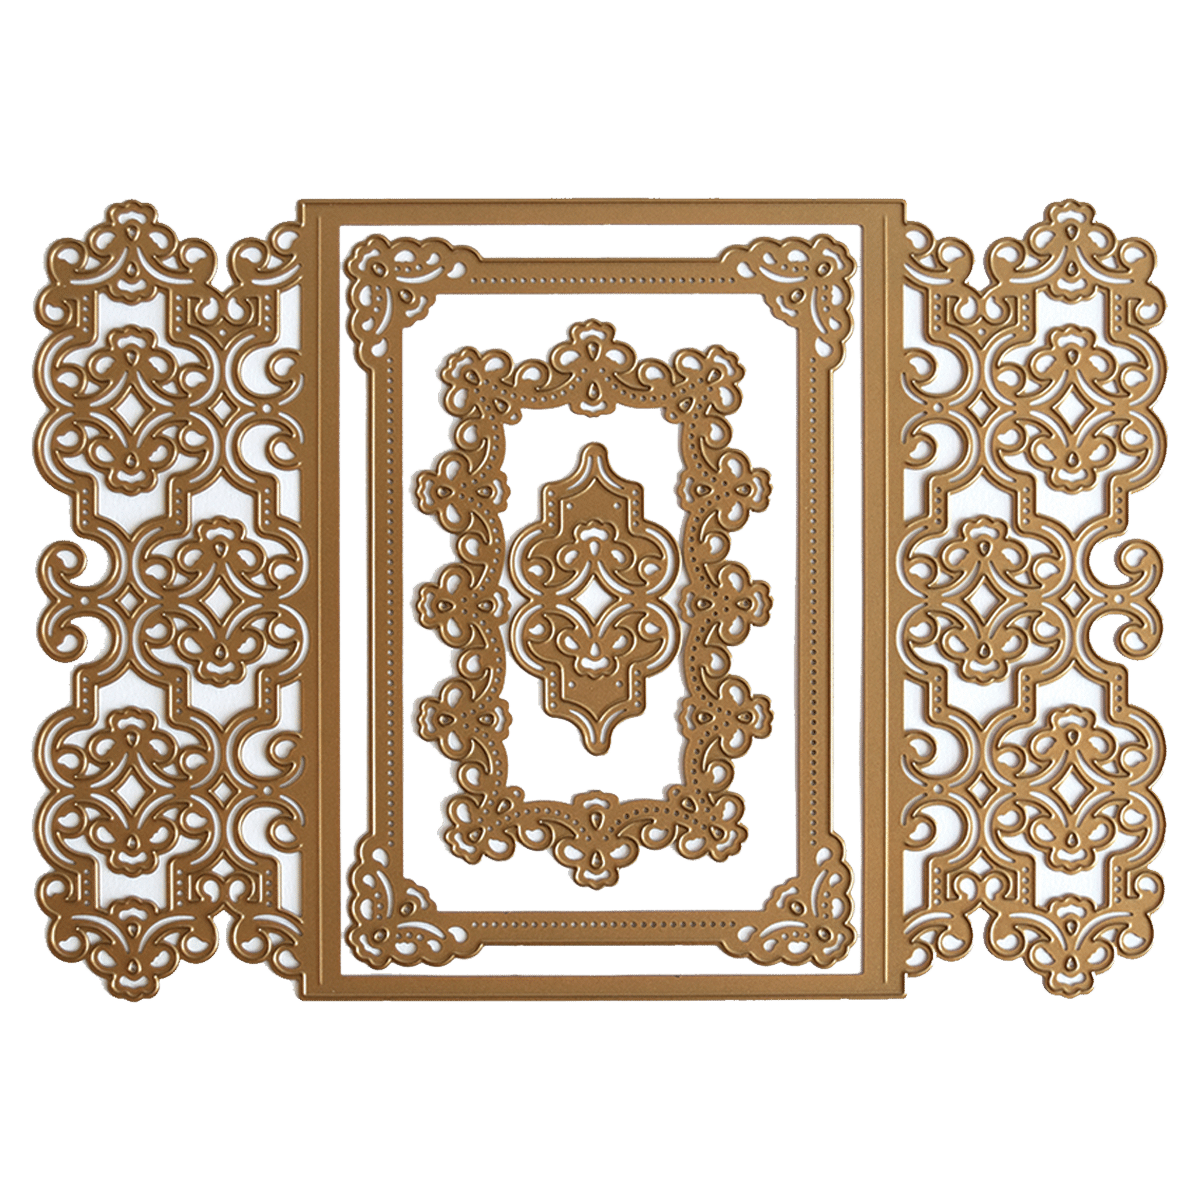 a gold and white ornamental design on a green background.